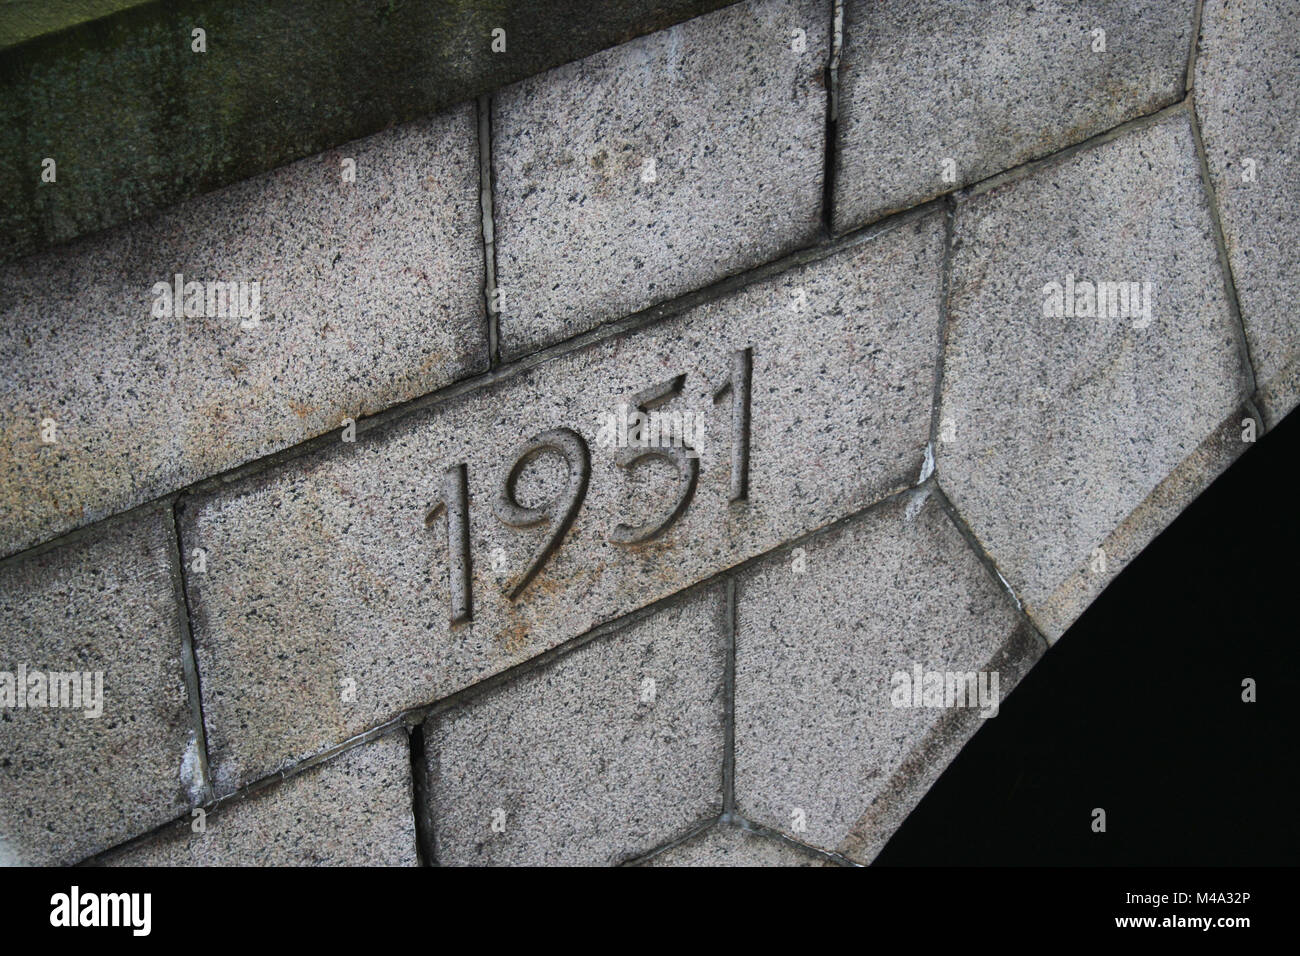 1951 carved in stone Stock Photo